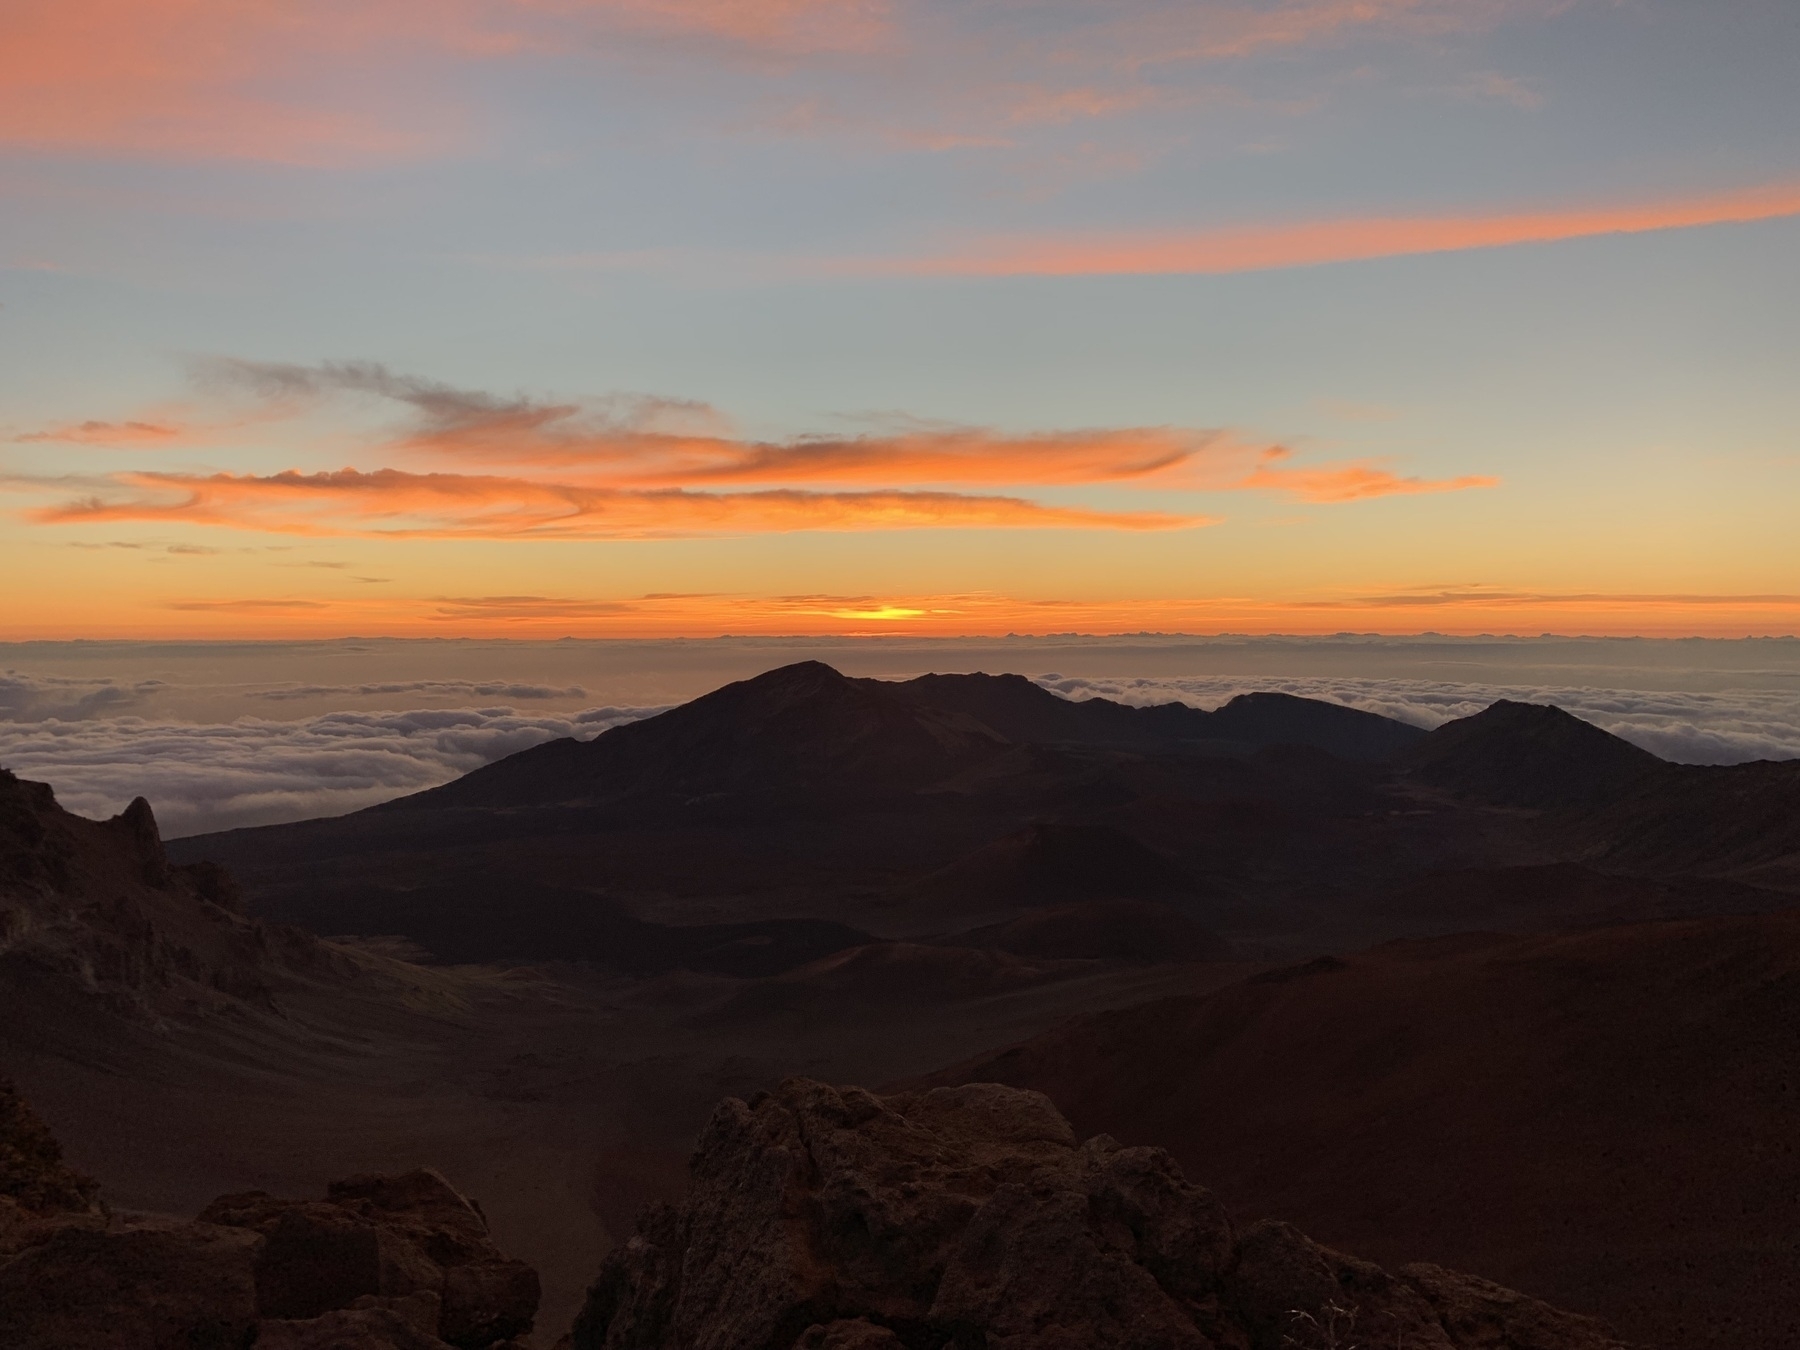 Photo of a sunrise over clouds and a barren volcanic landscape